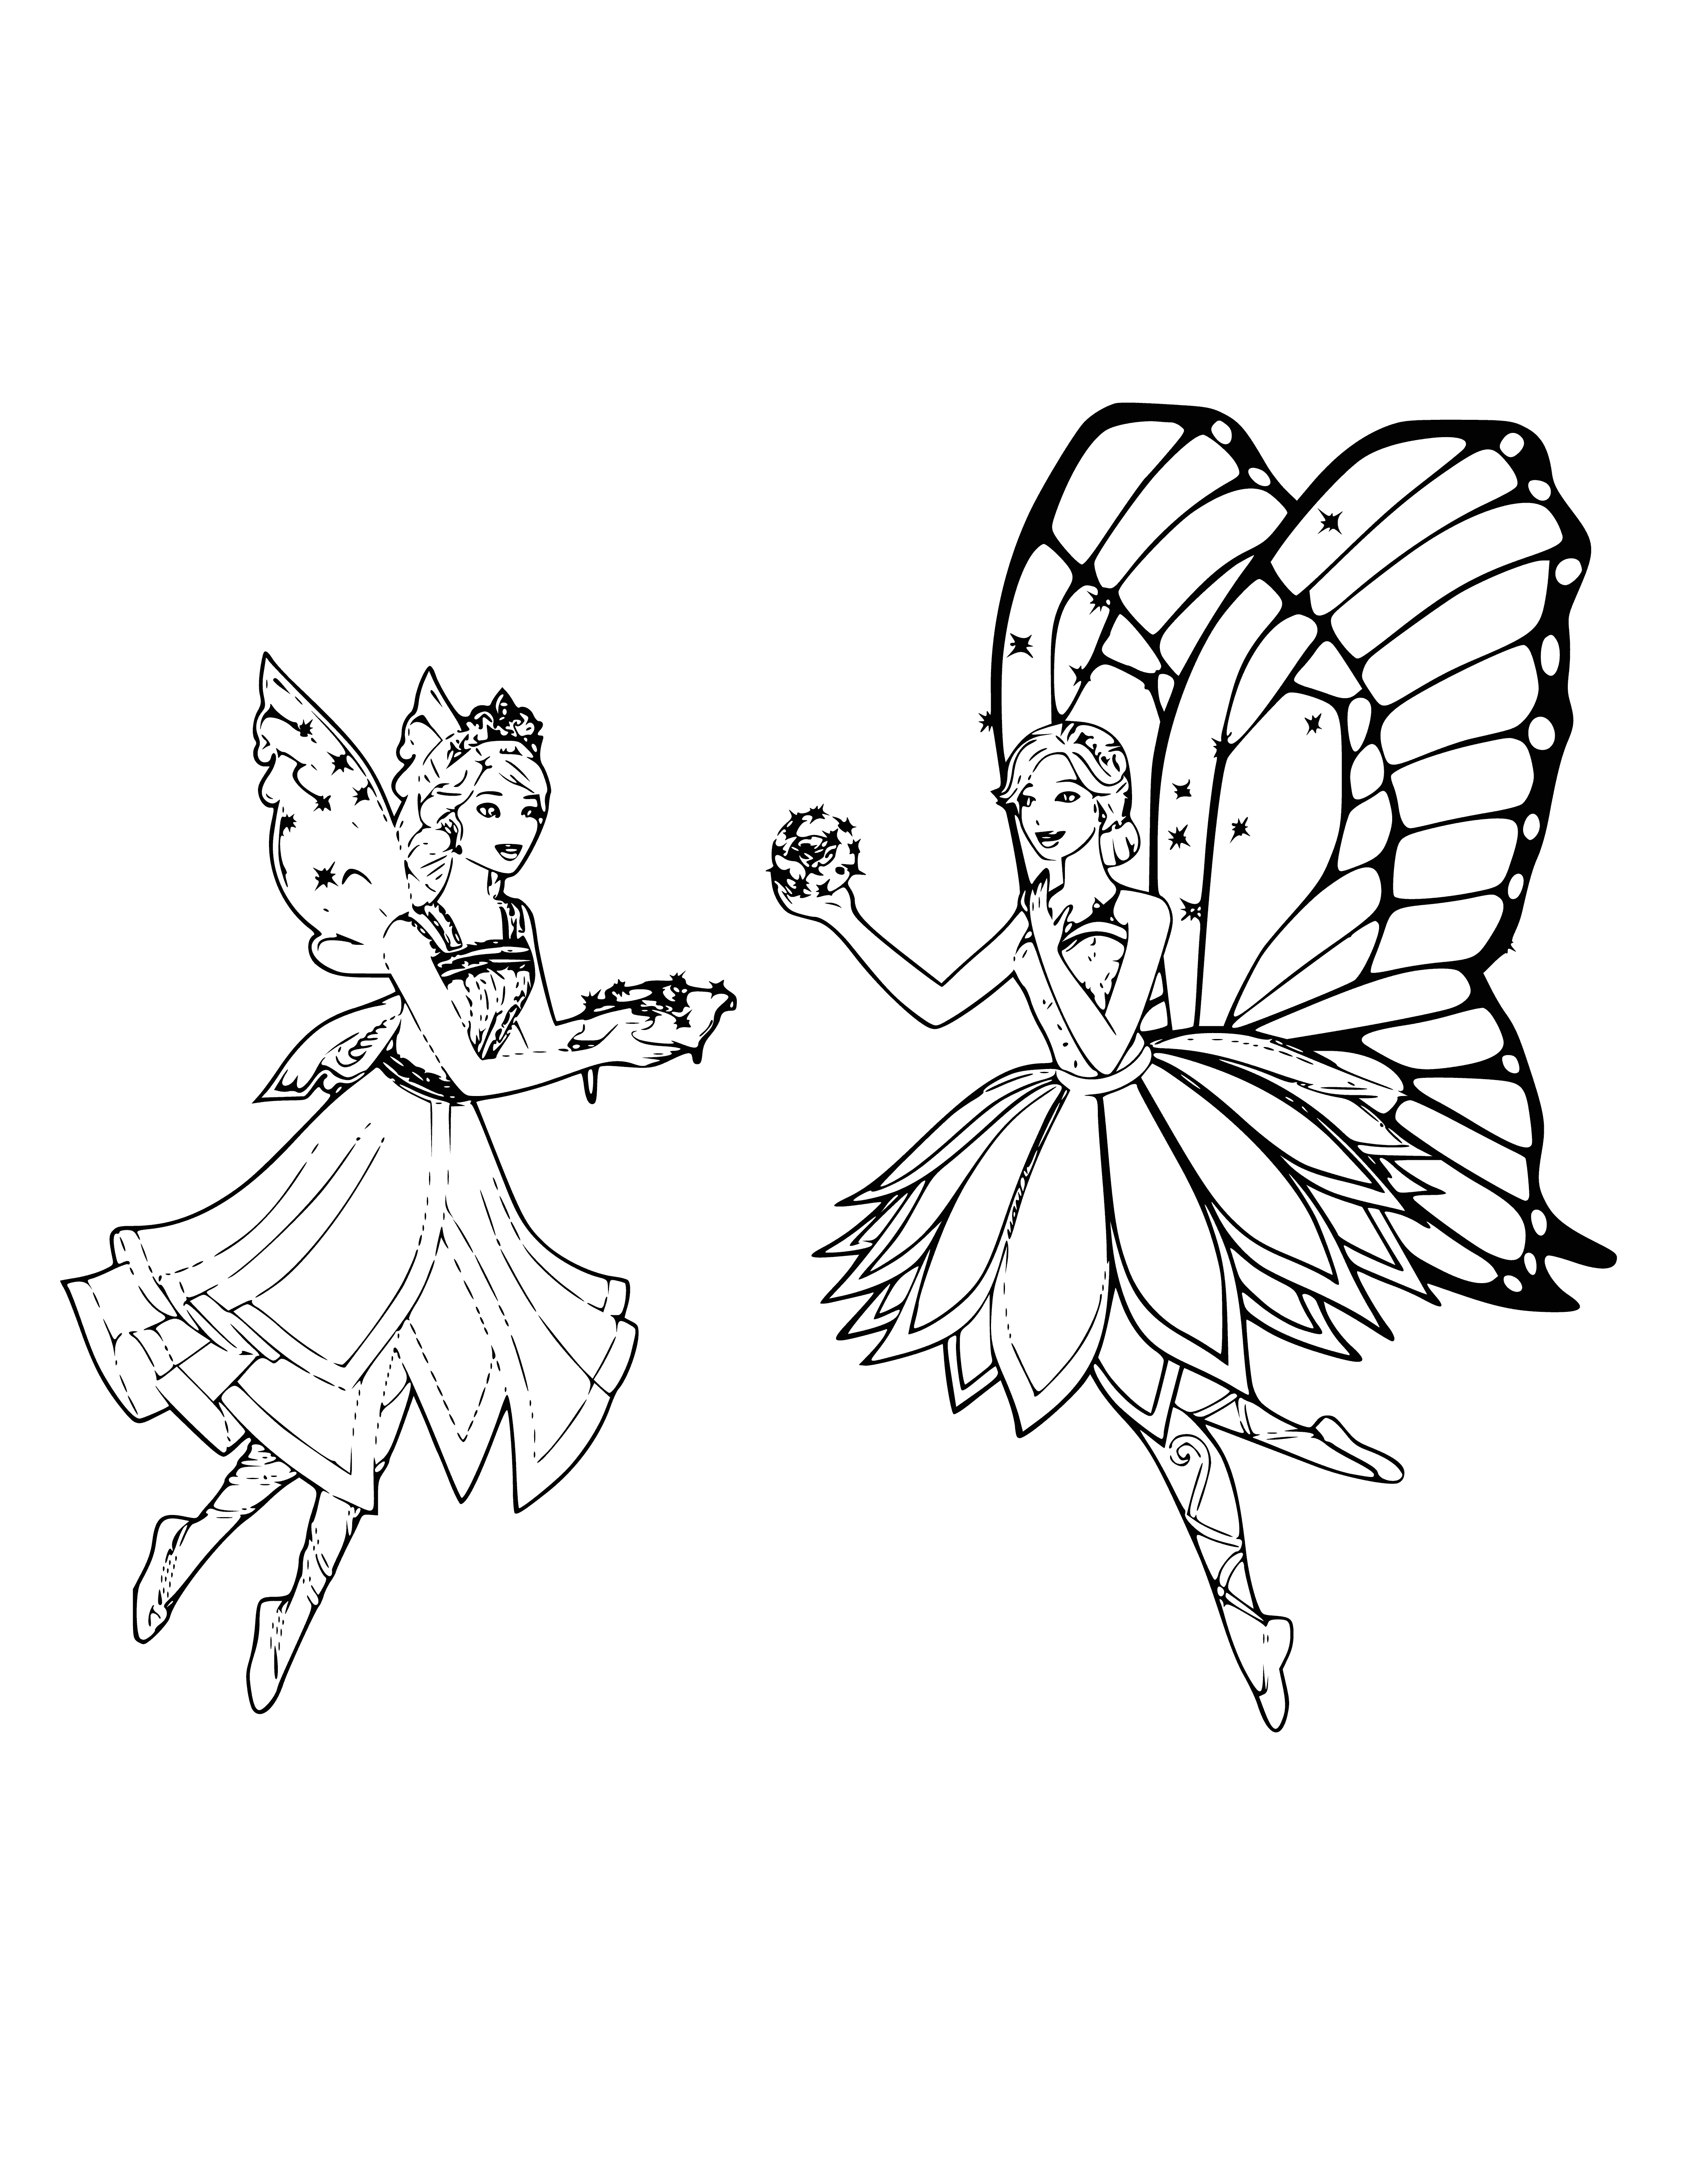 coloring page: Two Barbie dolls with removable wings flutter around--one blonde in pink/purple, one black-haired in green.